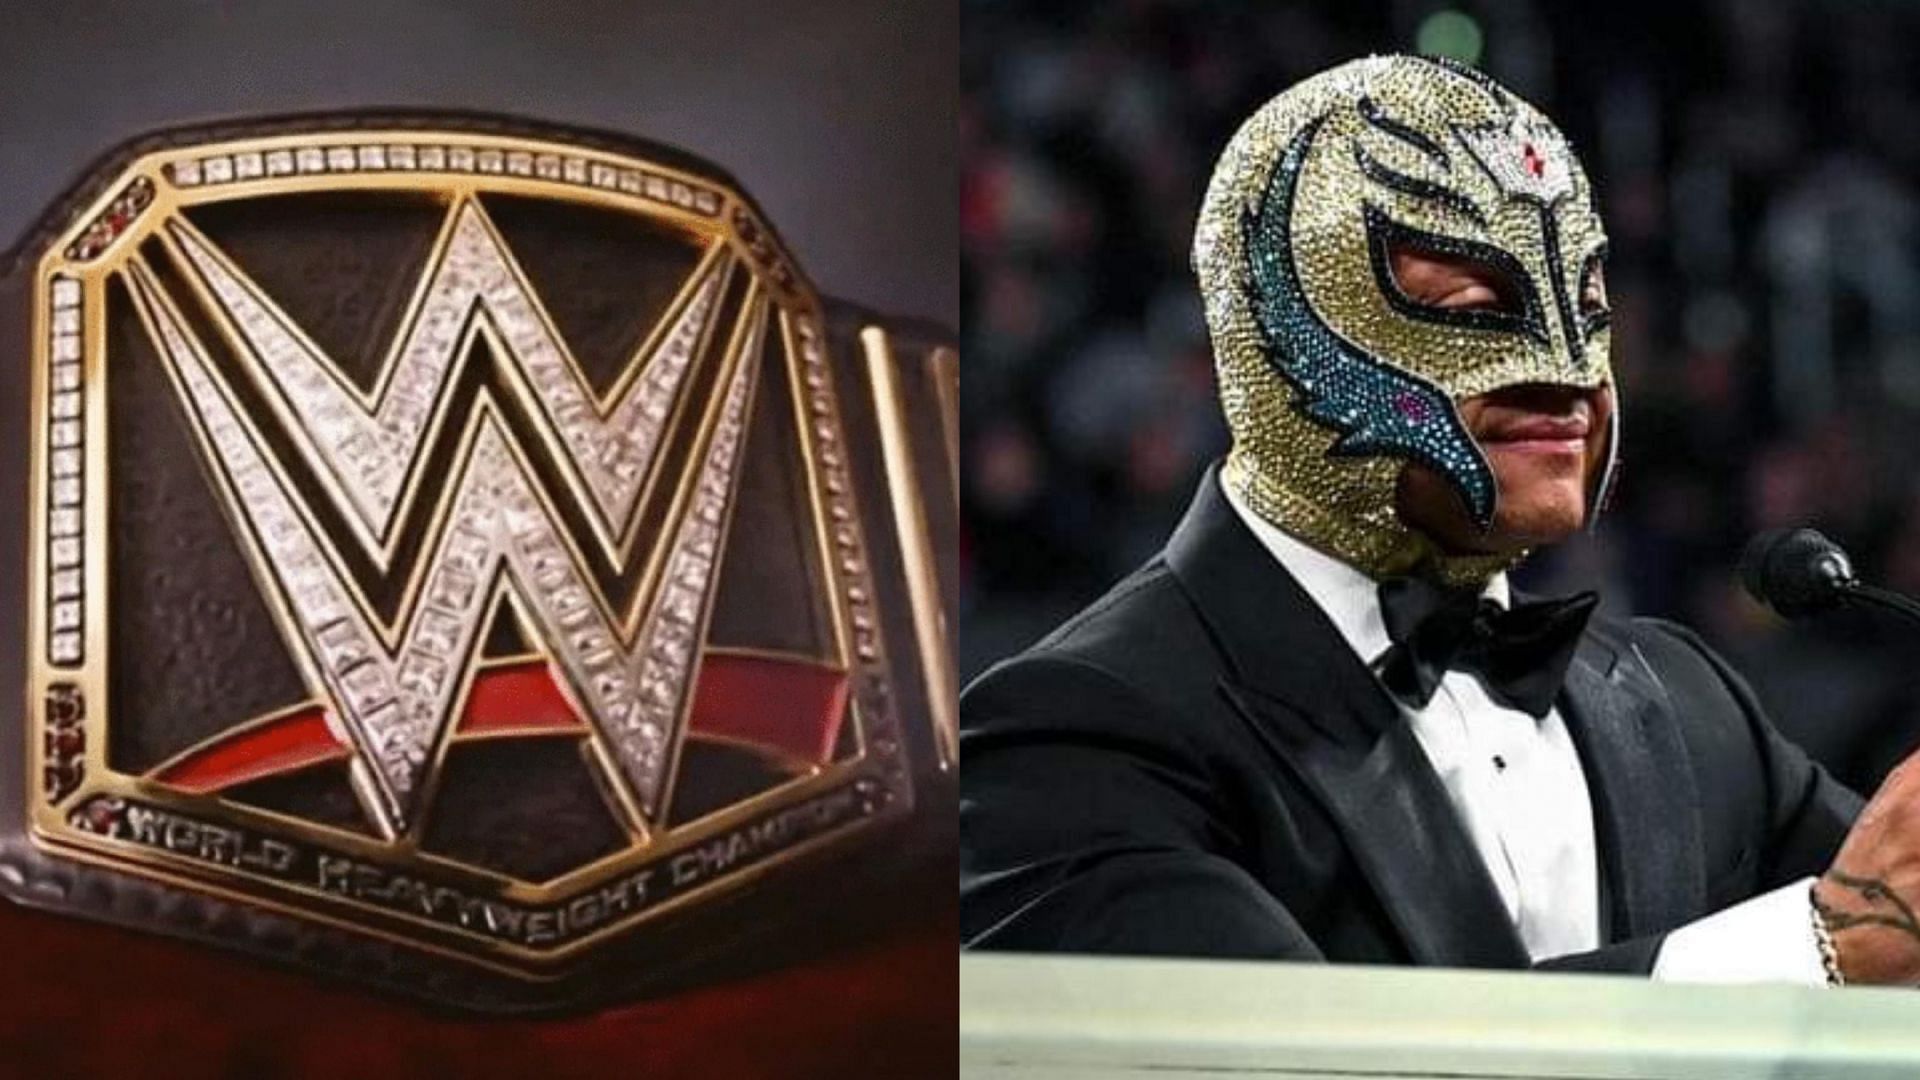 Rey Mysterio was recently inducted into the WWE Hall of Fame 